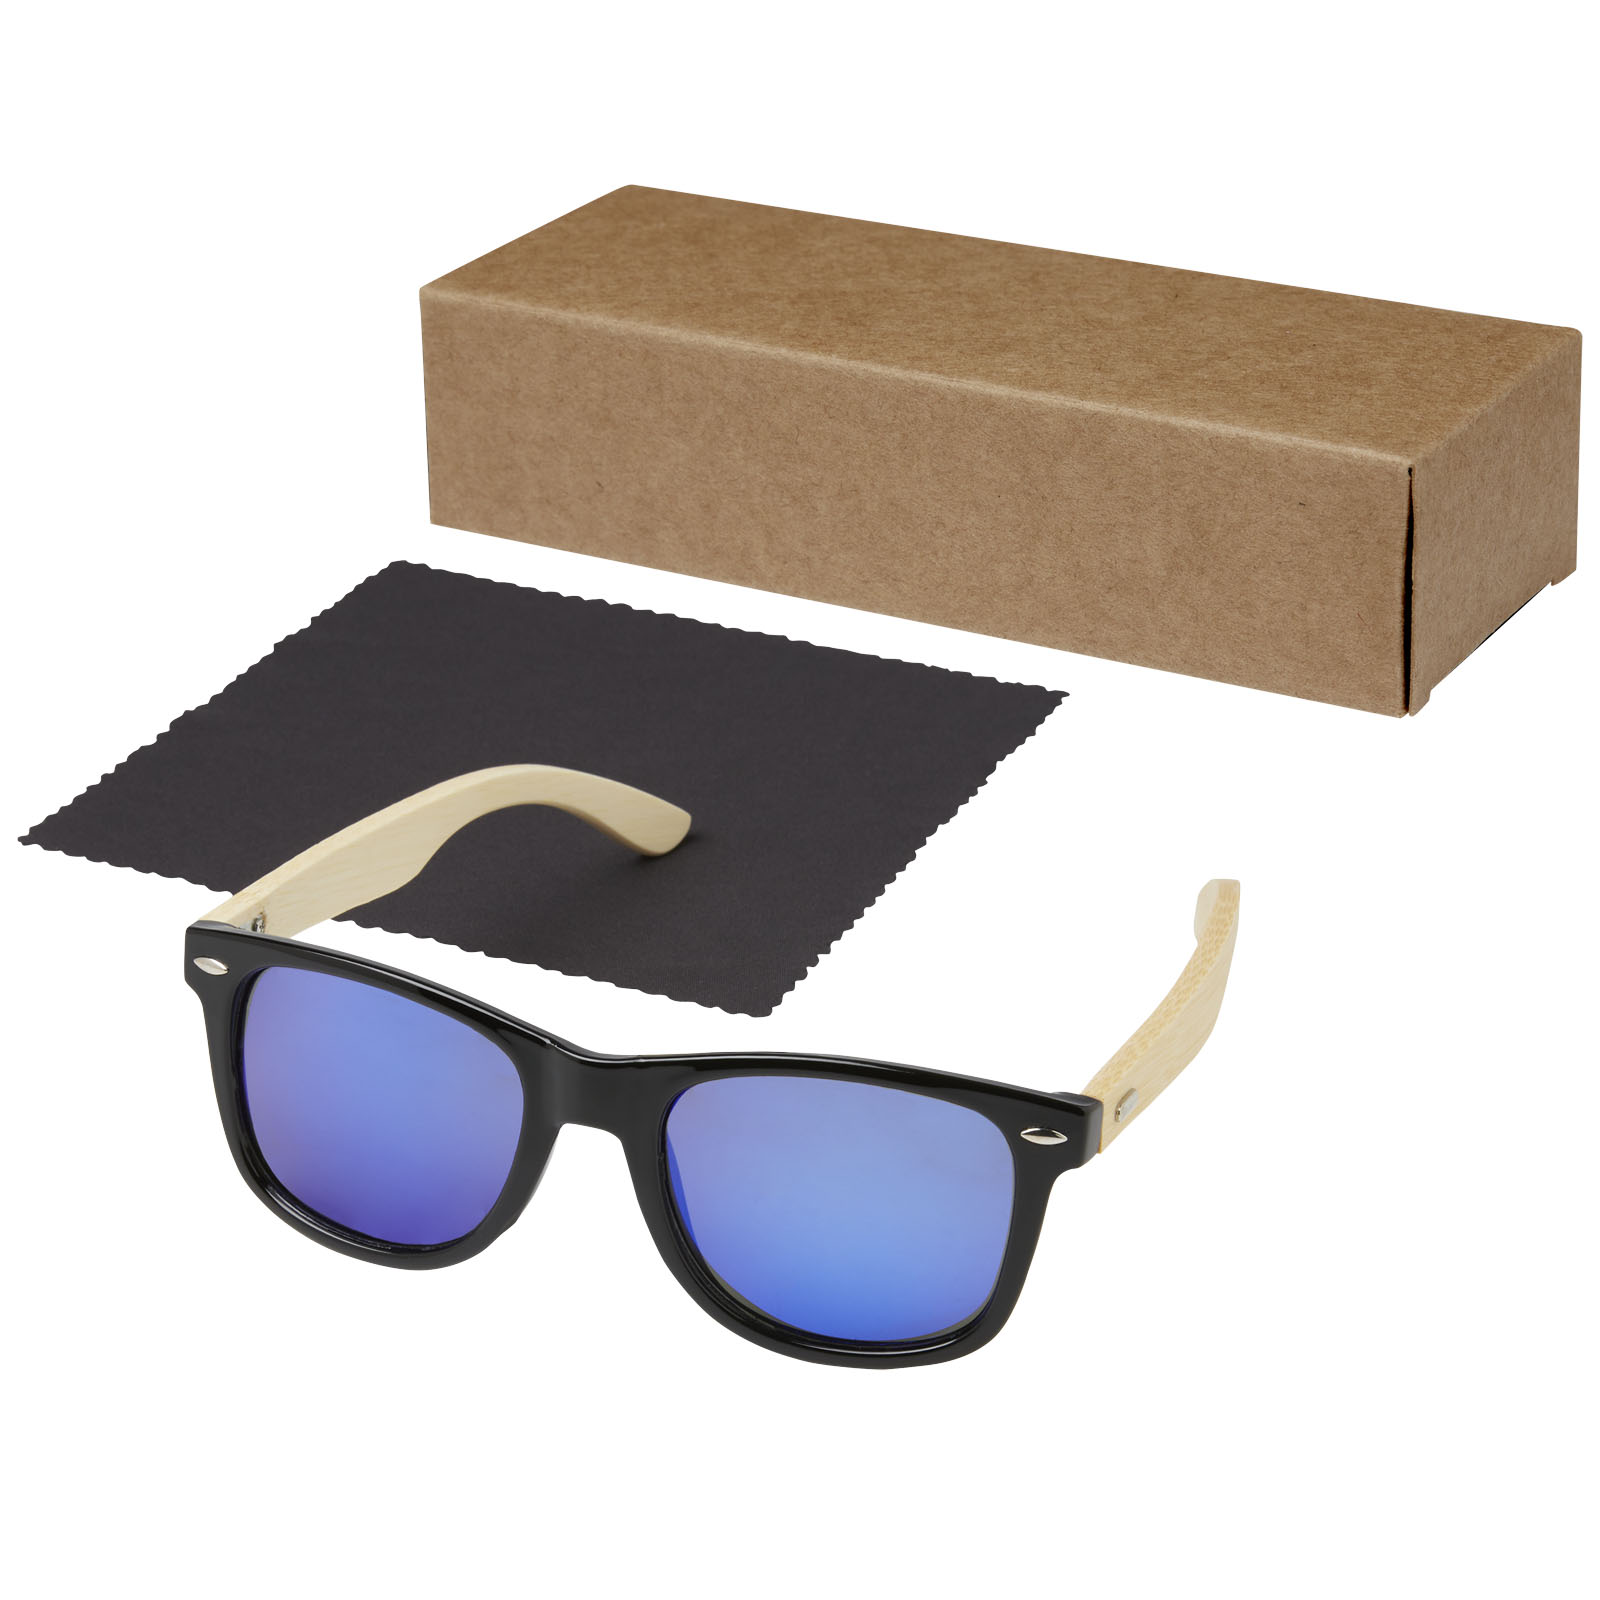 Advertising Sunglasses - Taiyō rPET/bamboo mirrored polarized sunglasses in gift box - 4